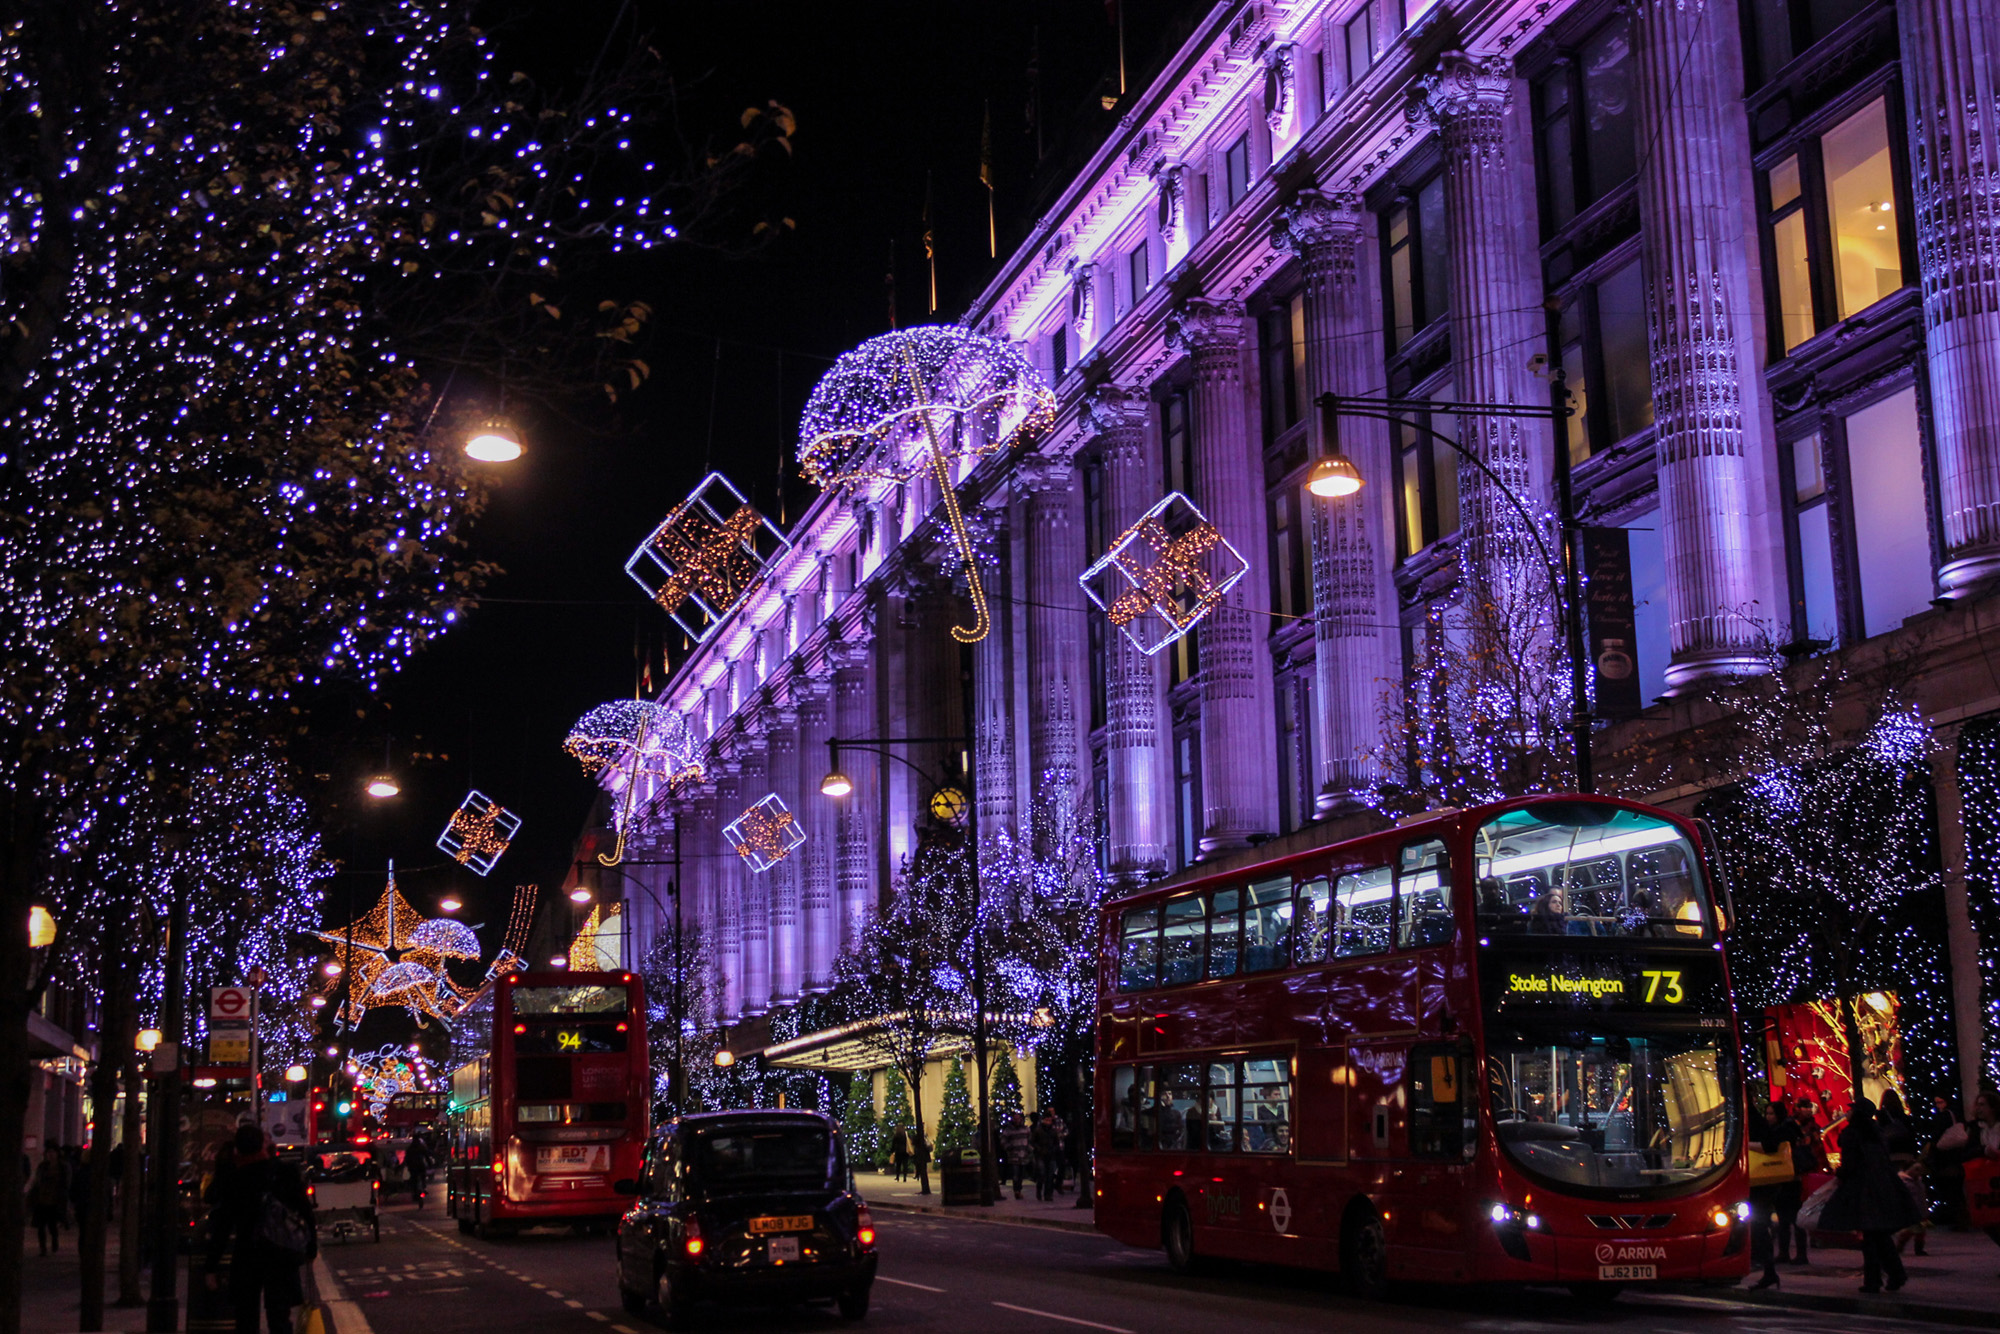 London's West End at Christmas